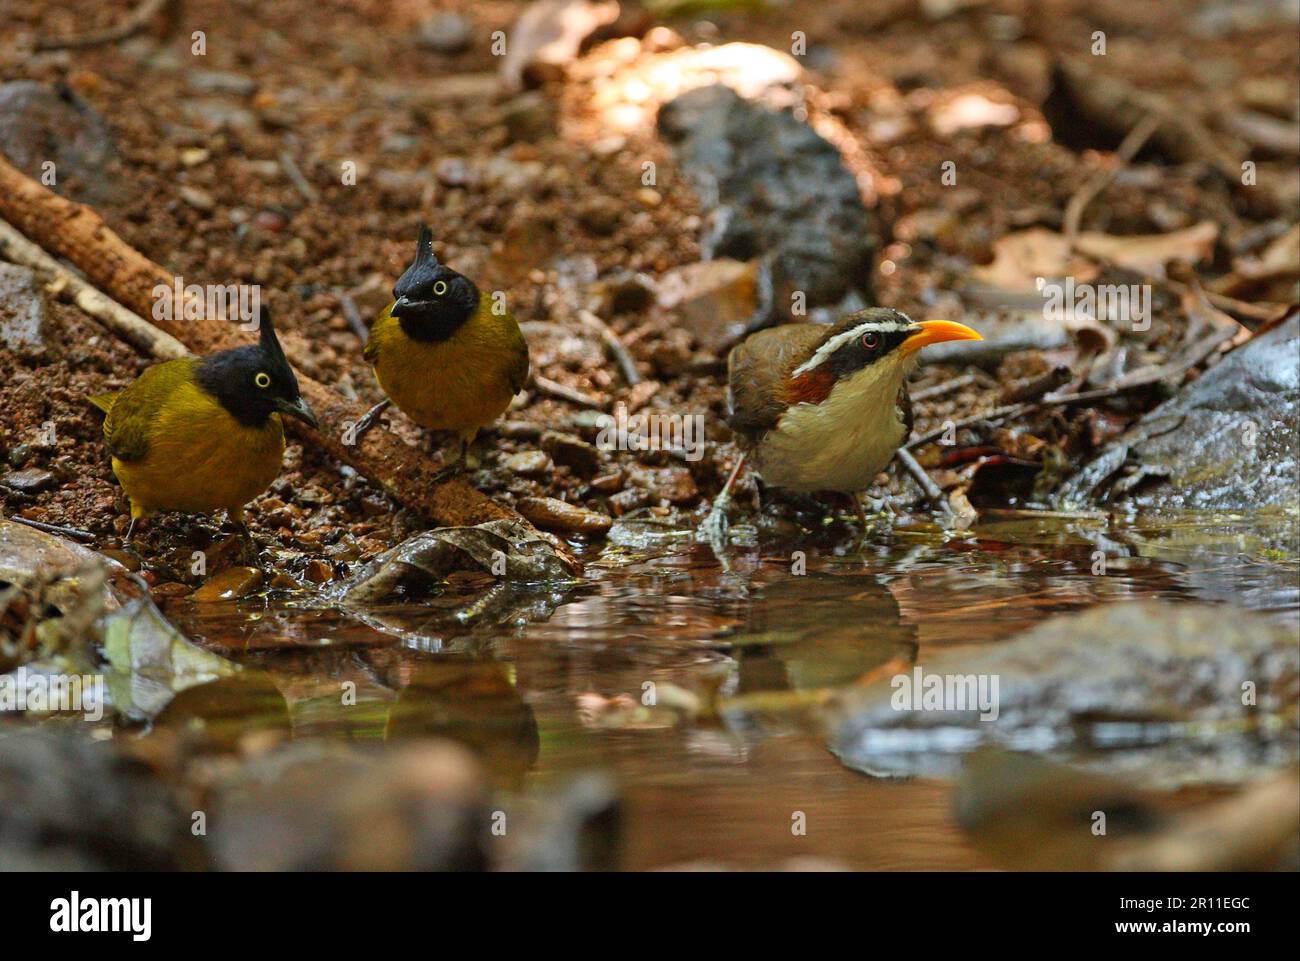 White-browed scimitar babbler (Pomatorhinus schisticeps) and black crested bulbul (Pycnonotus melanicterus) adults, drinking at the forest pool Stock Photo